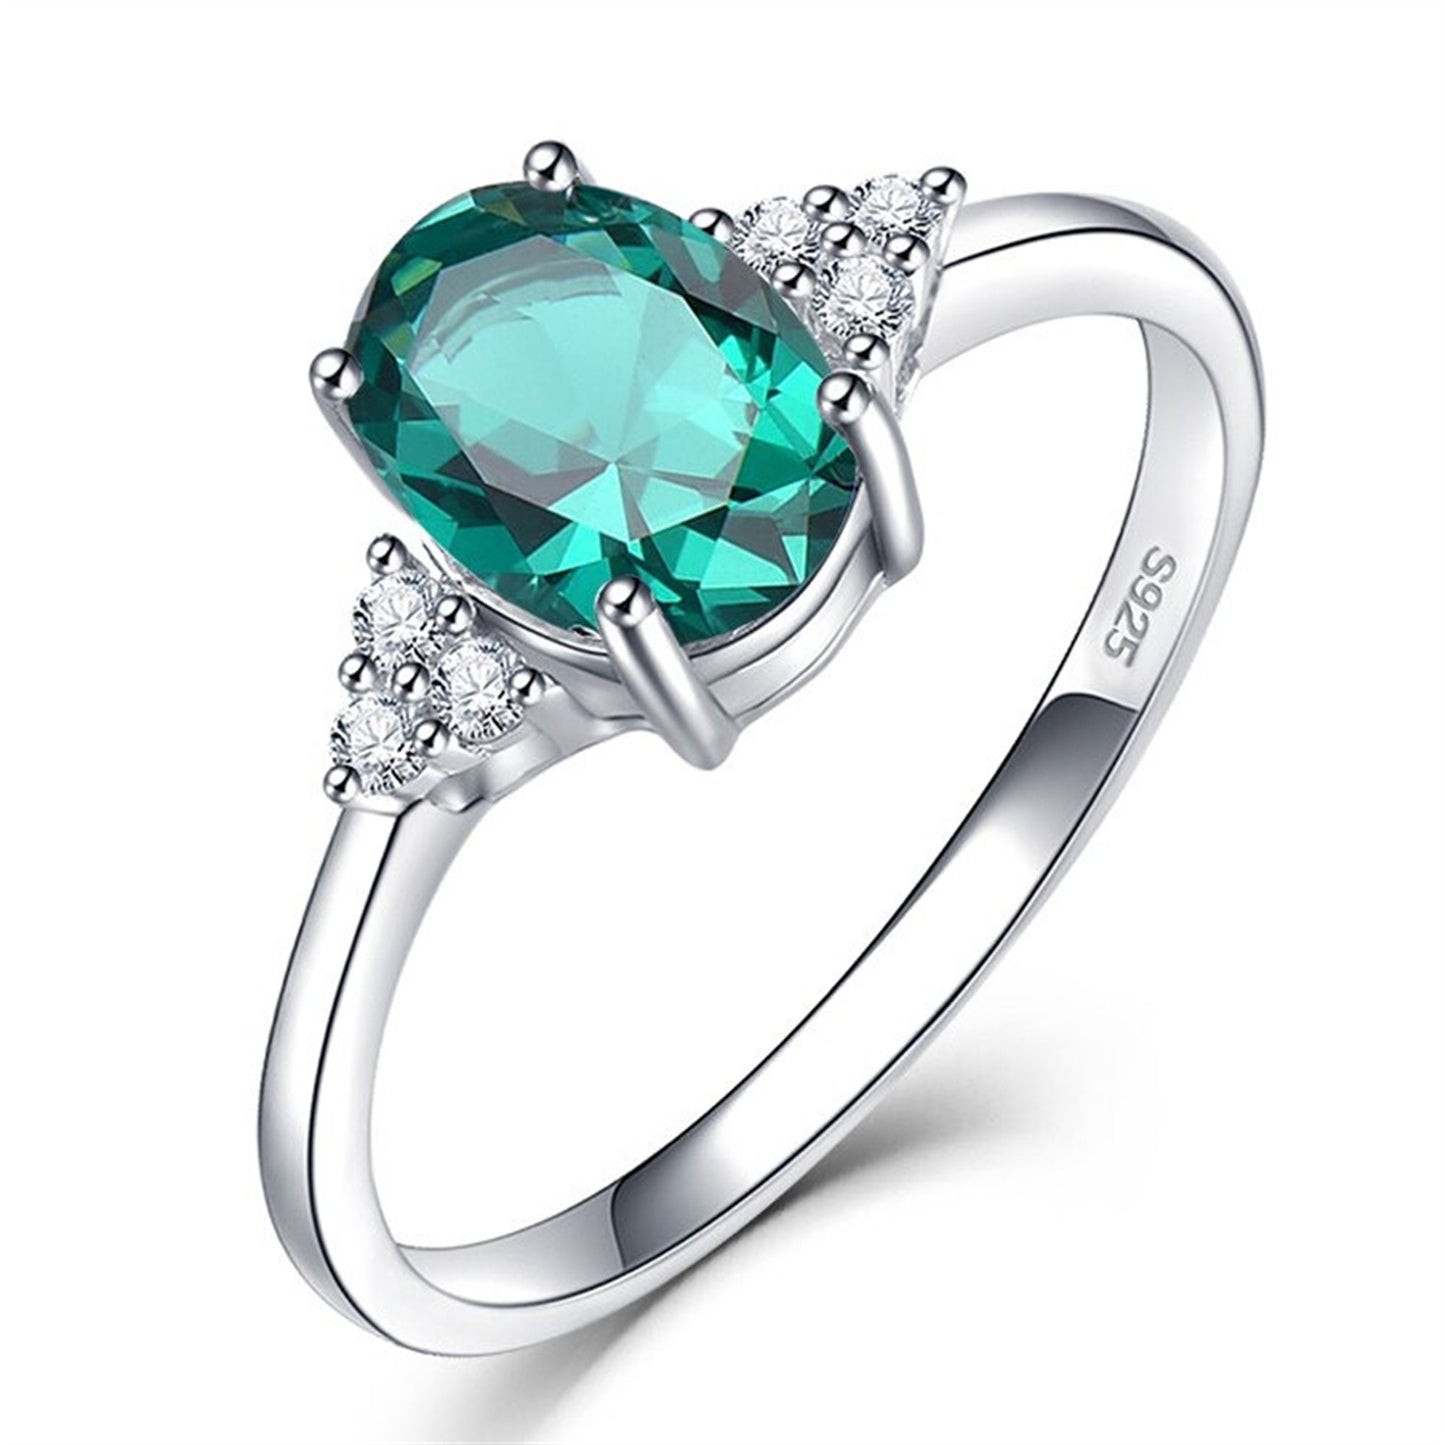 Oval Emerald Ring, Solid 925 Silver Gemstone Ring